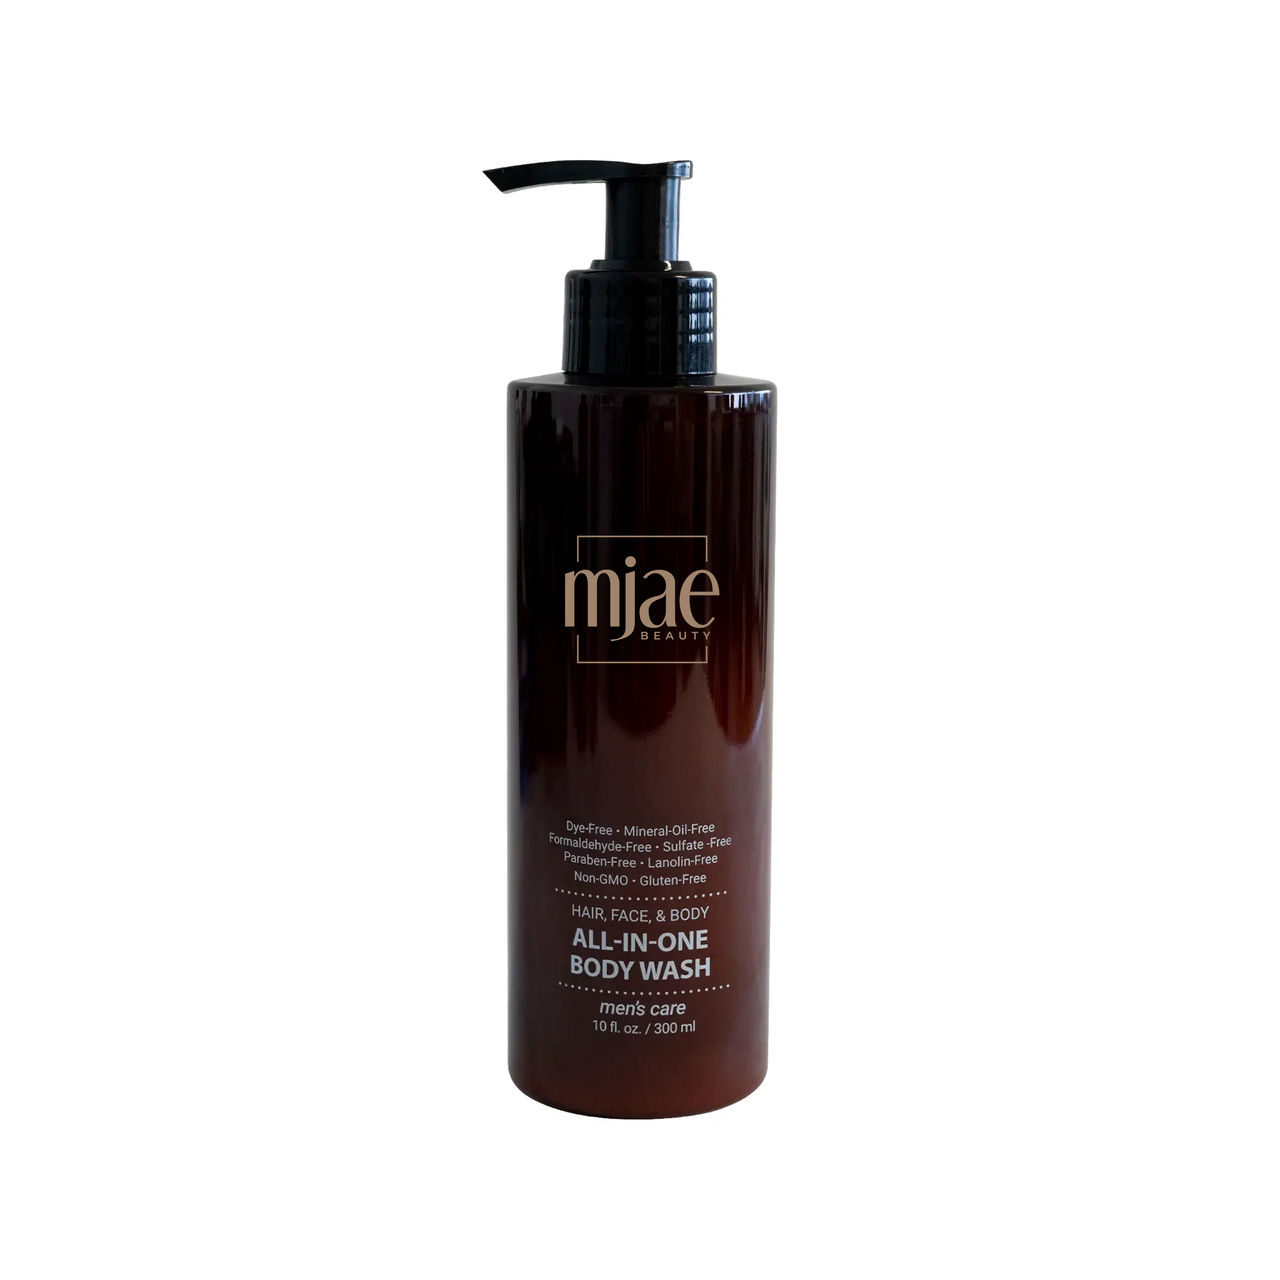 Mjae All-in-one Body Wash - Clean Beauty